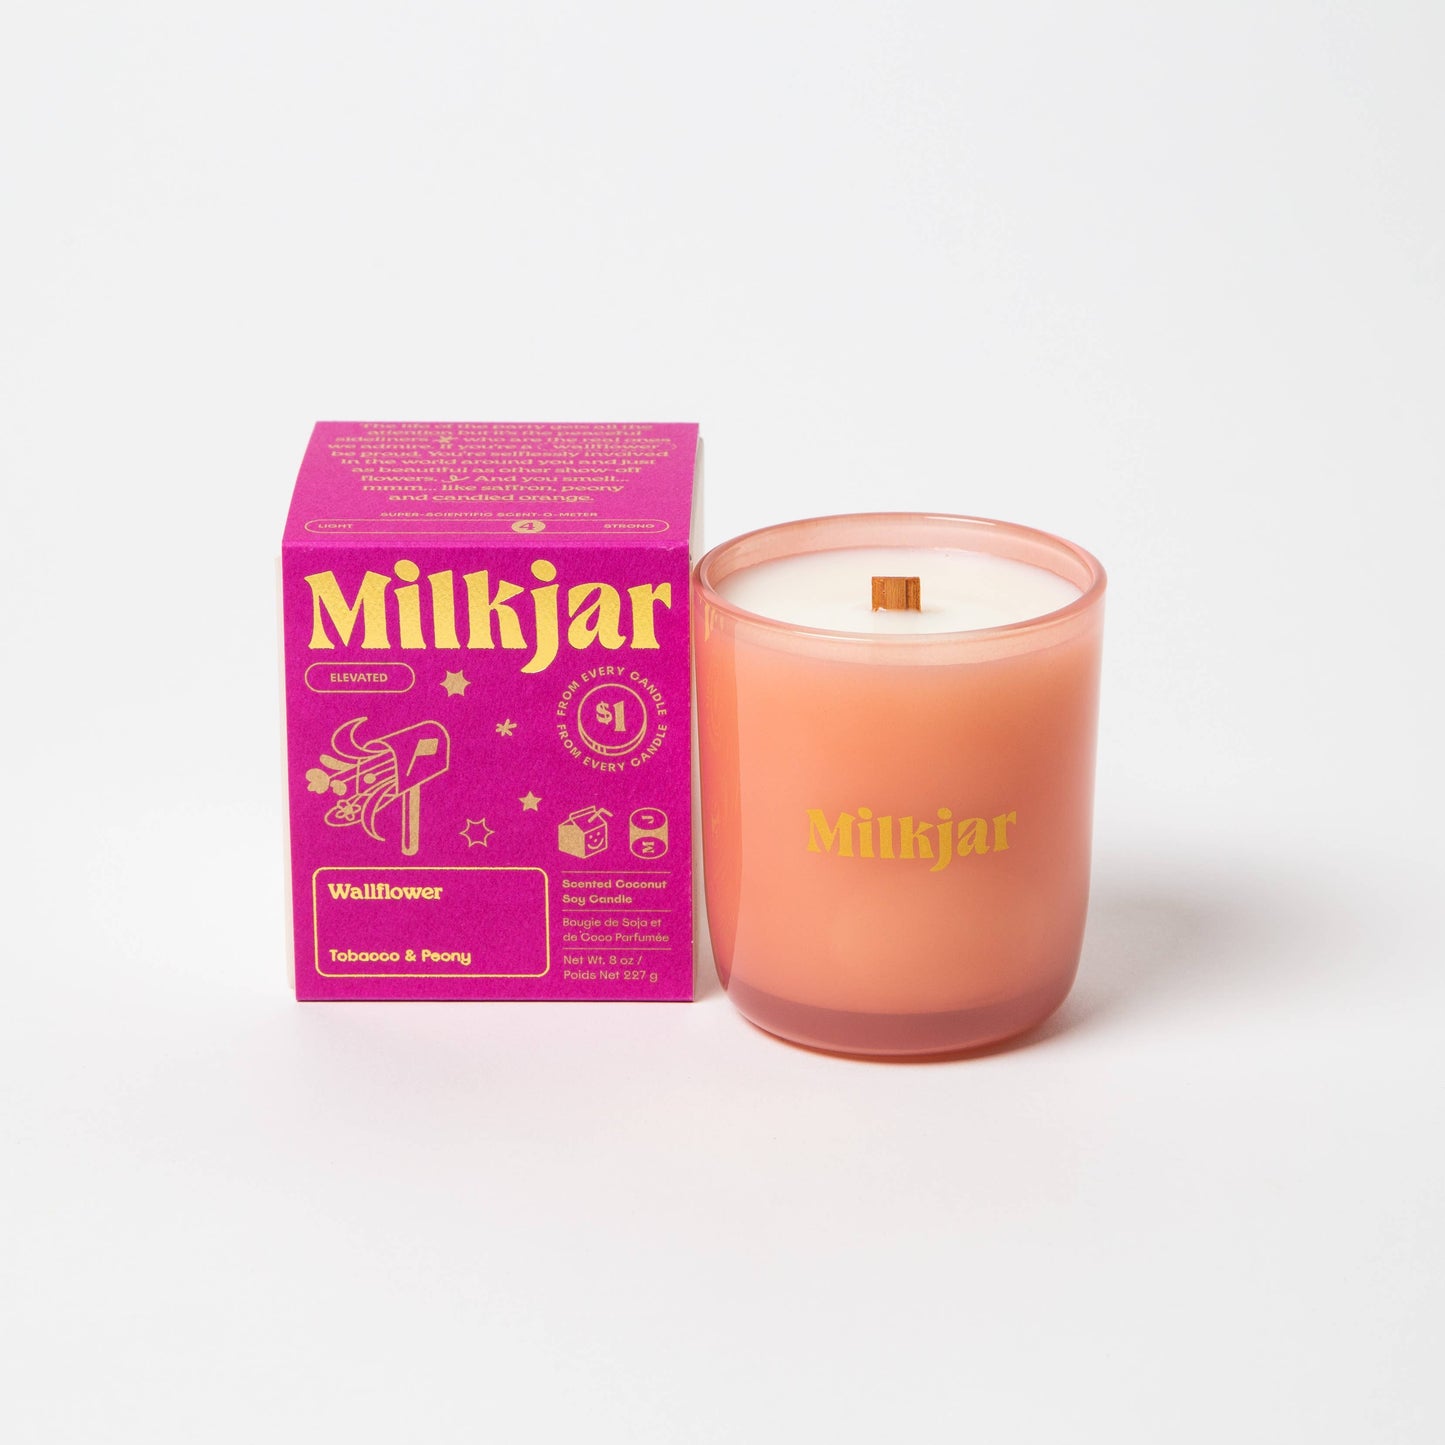 Milk Jar Candle Co. Wallflower Scented Candle - Osmology Scented Candles & Home Fragrance